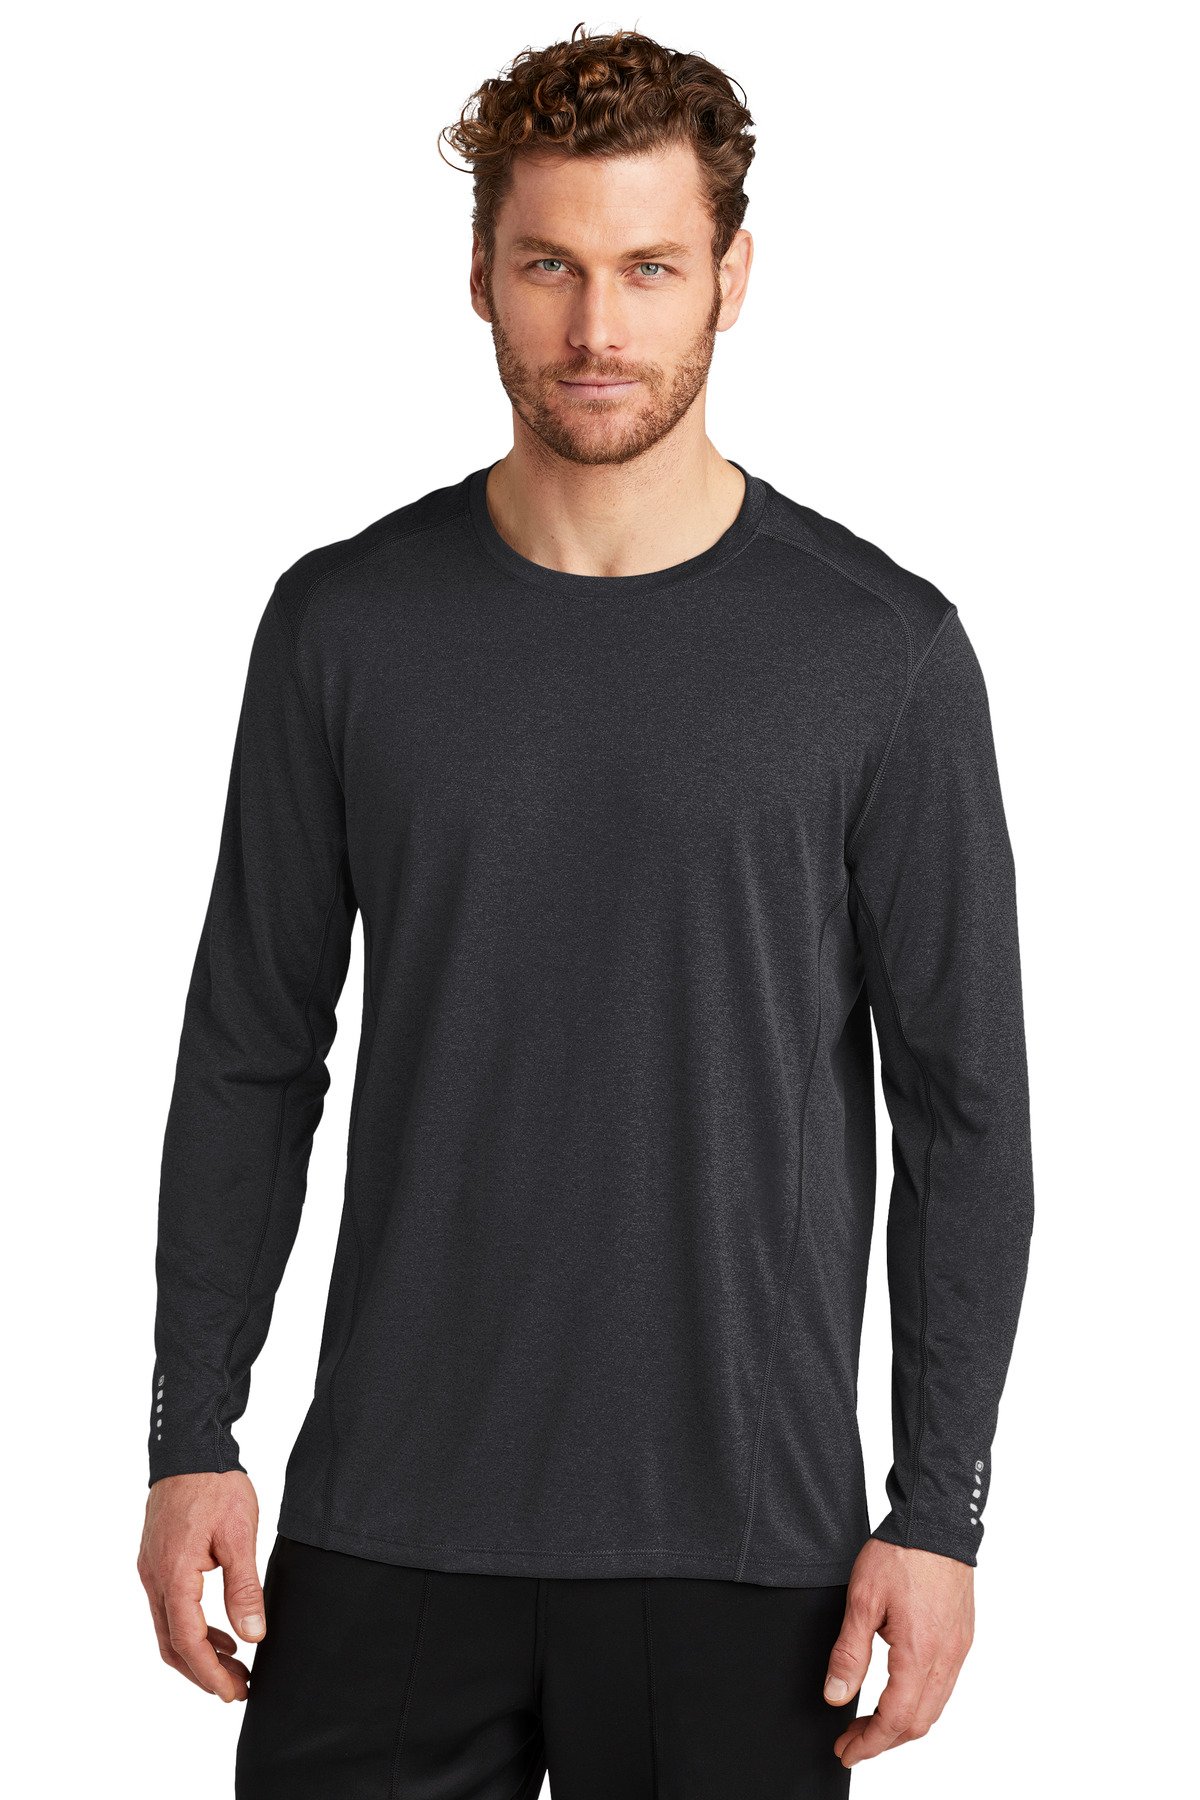 Front view of Long Sleeve Pulse Crew